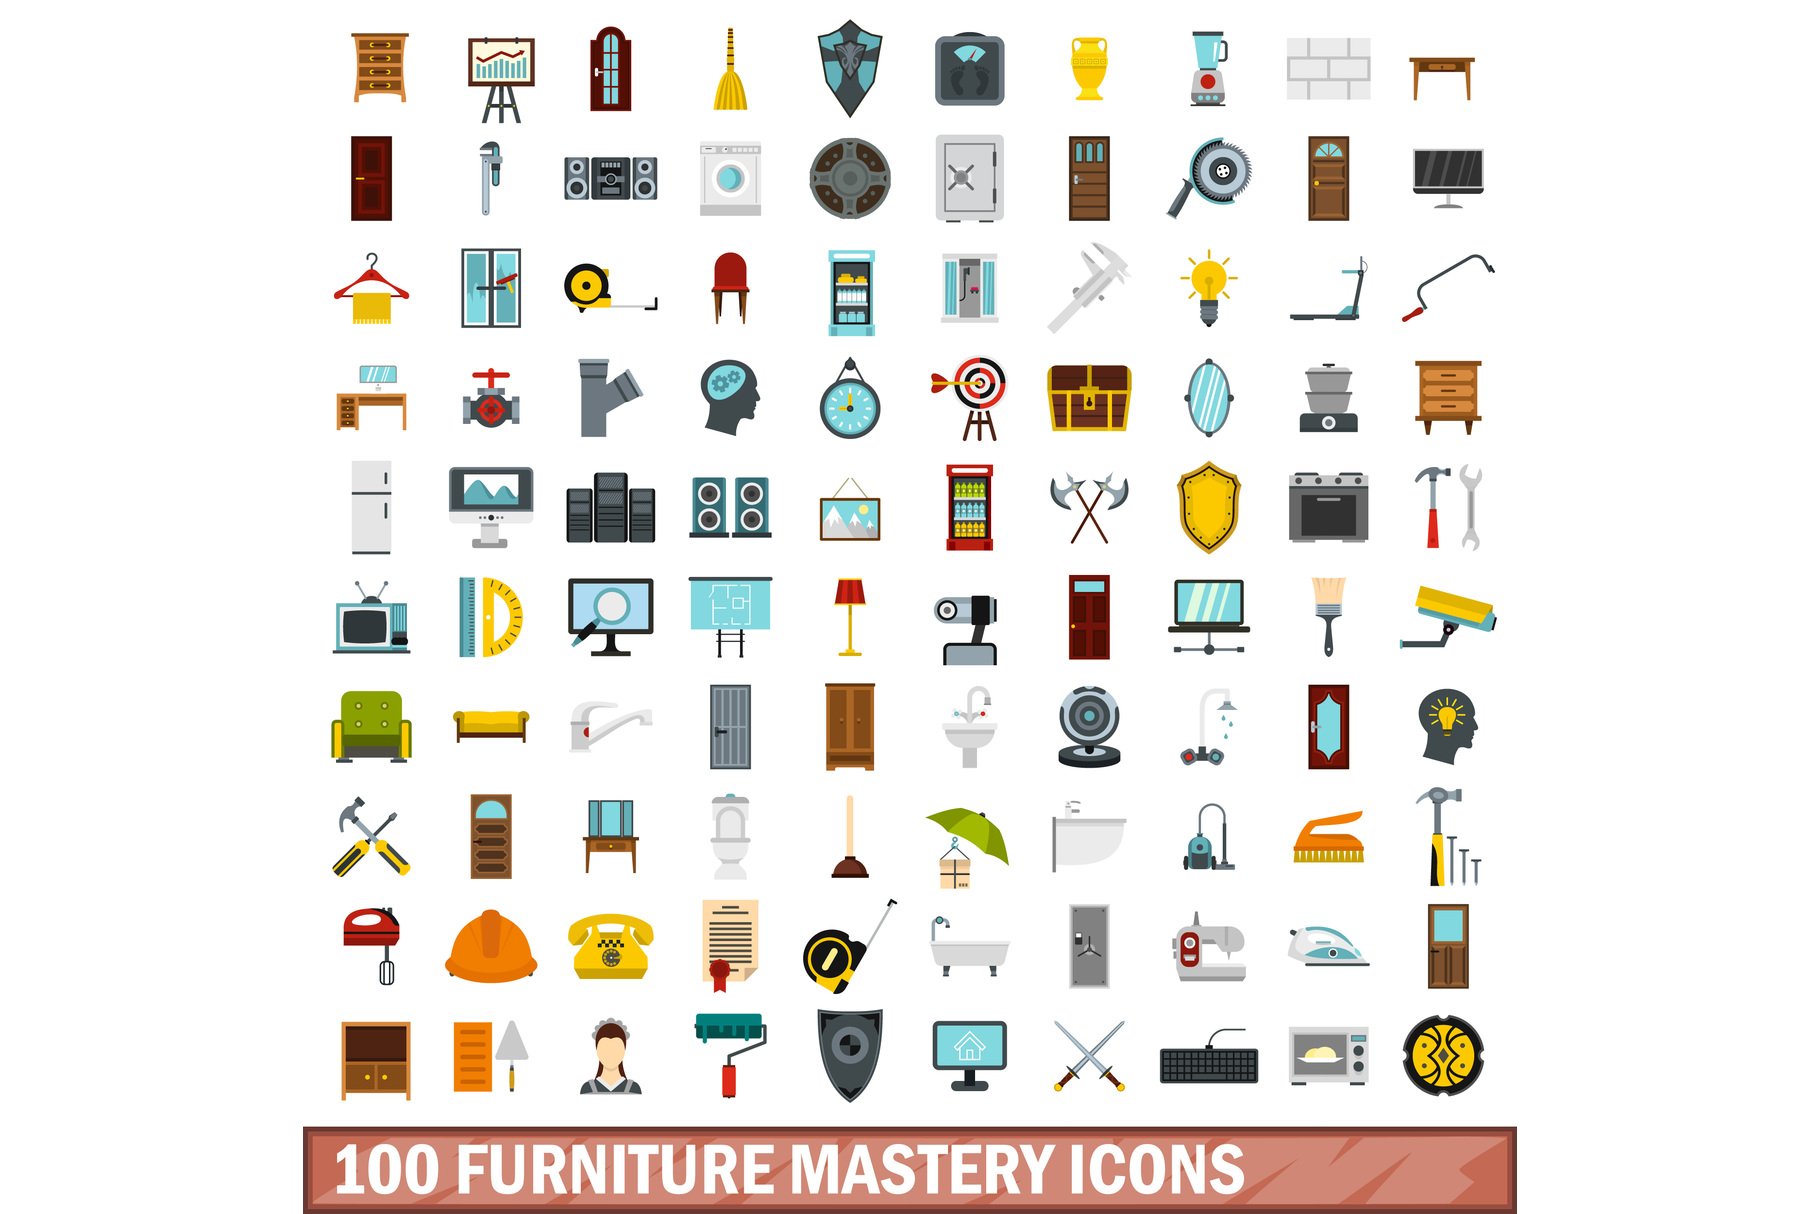 100 furniture mastery icons set cover image.